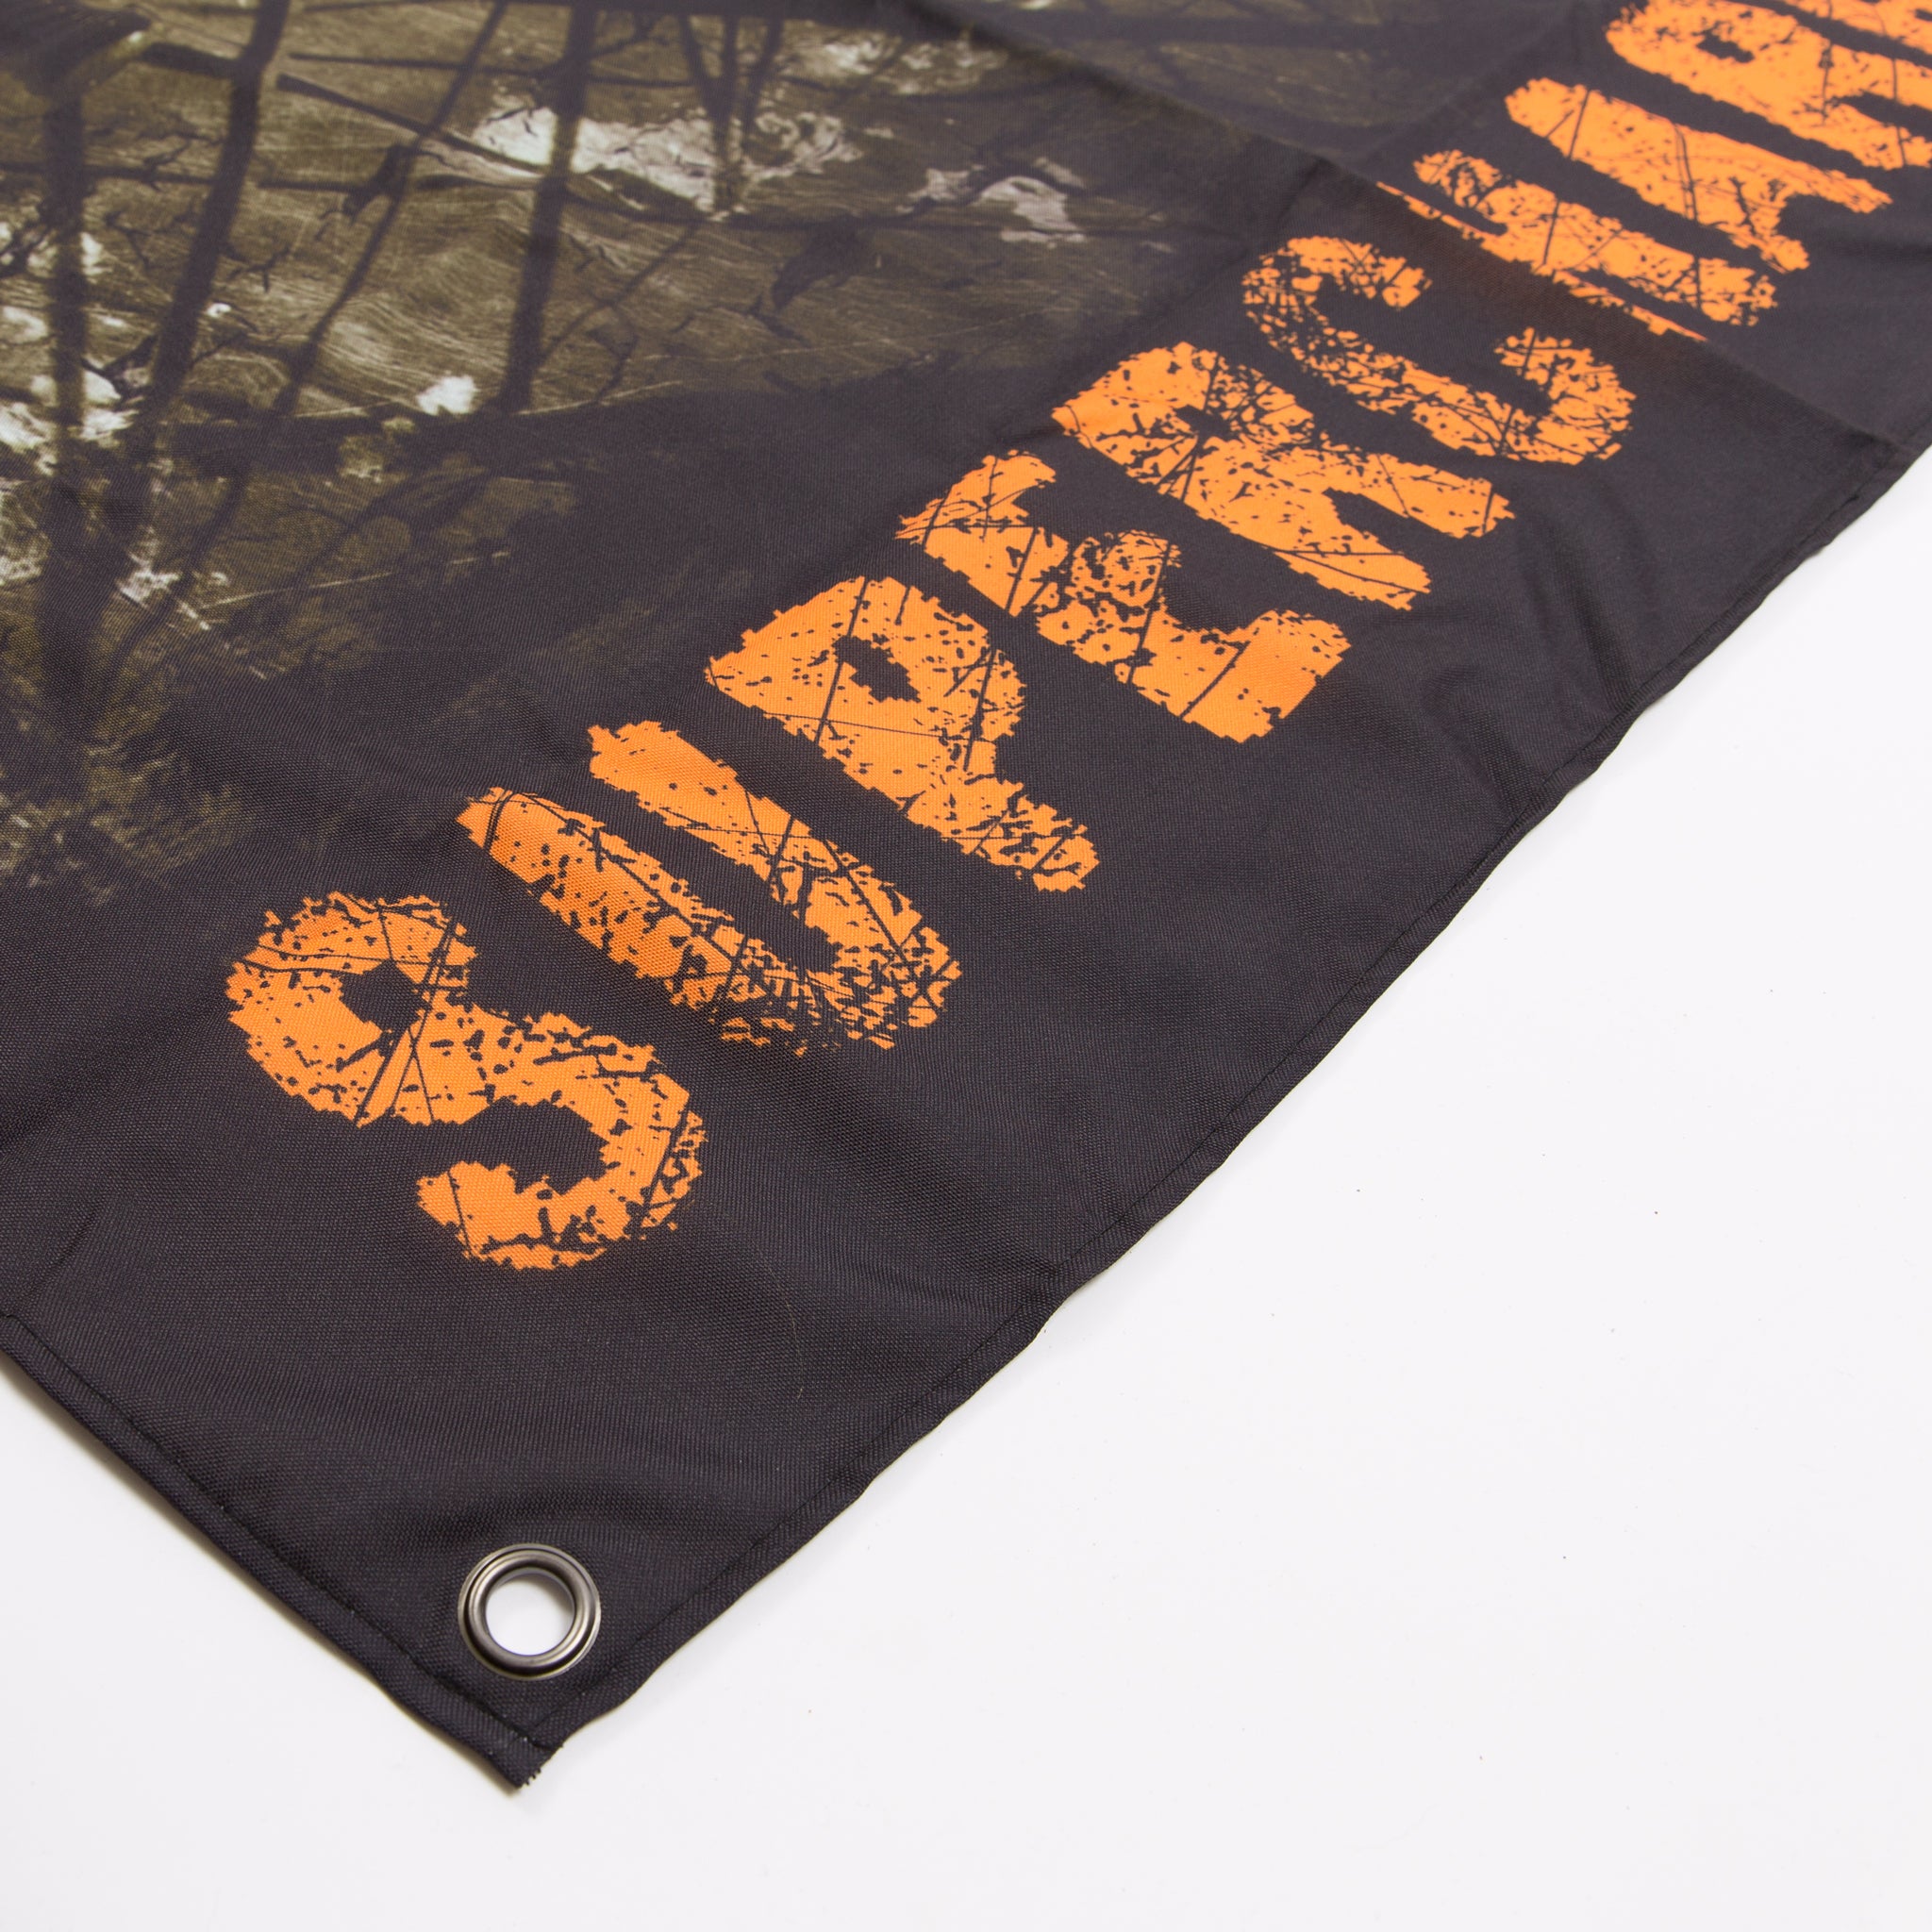 Supercharger Wall Flag US